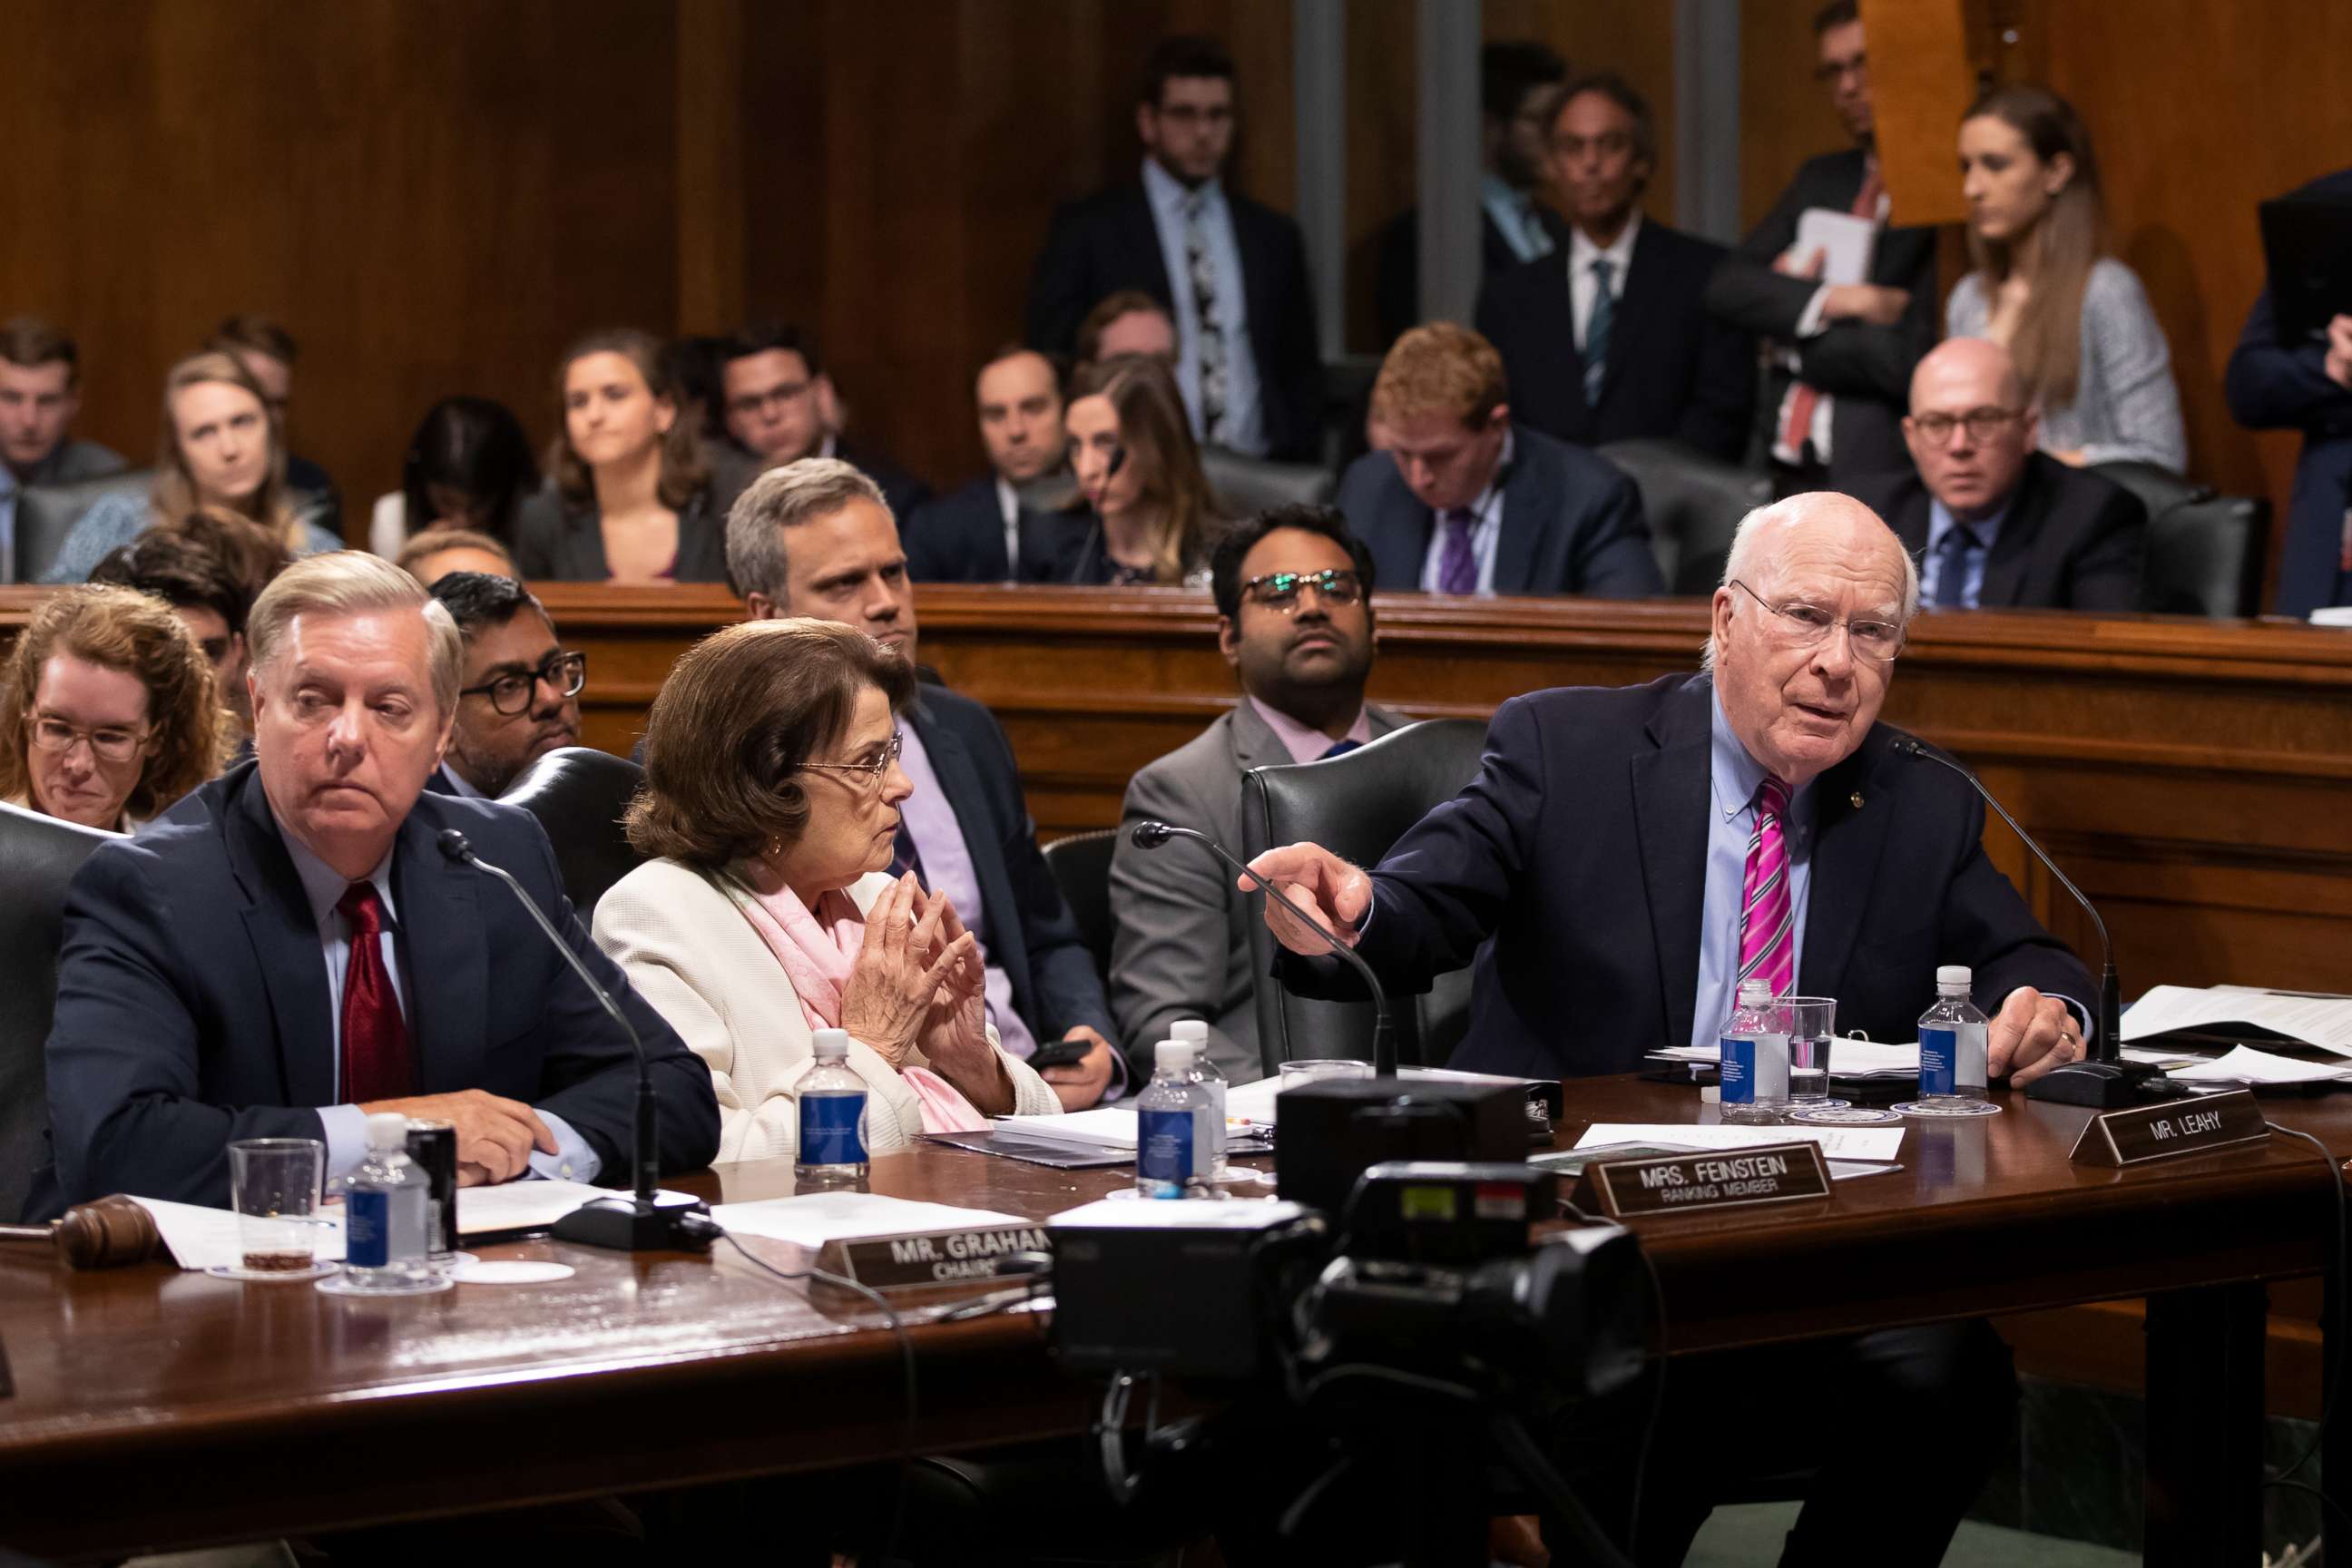 PHOTO: Senate Judiciary Committee Chairman Lindsey Graham and Sen. Dianne Feinstein listen as Sen. Patrick Leahy charges Graham with breaking with normal rules of procedure.